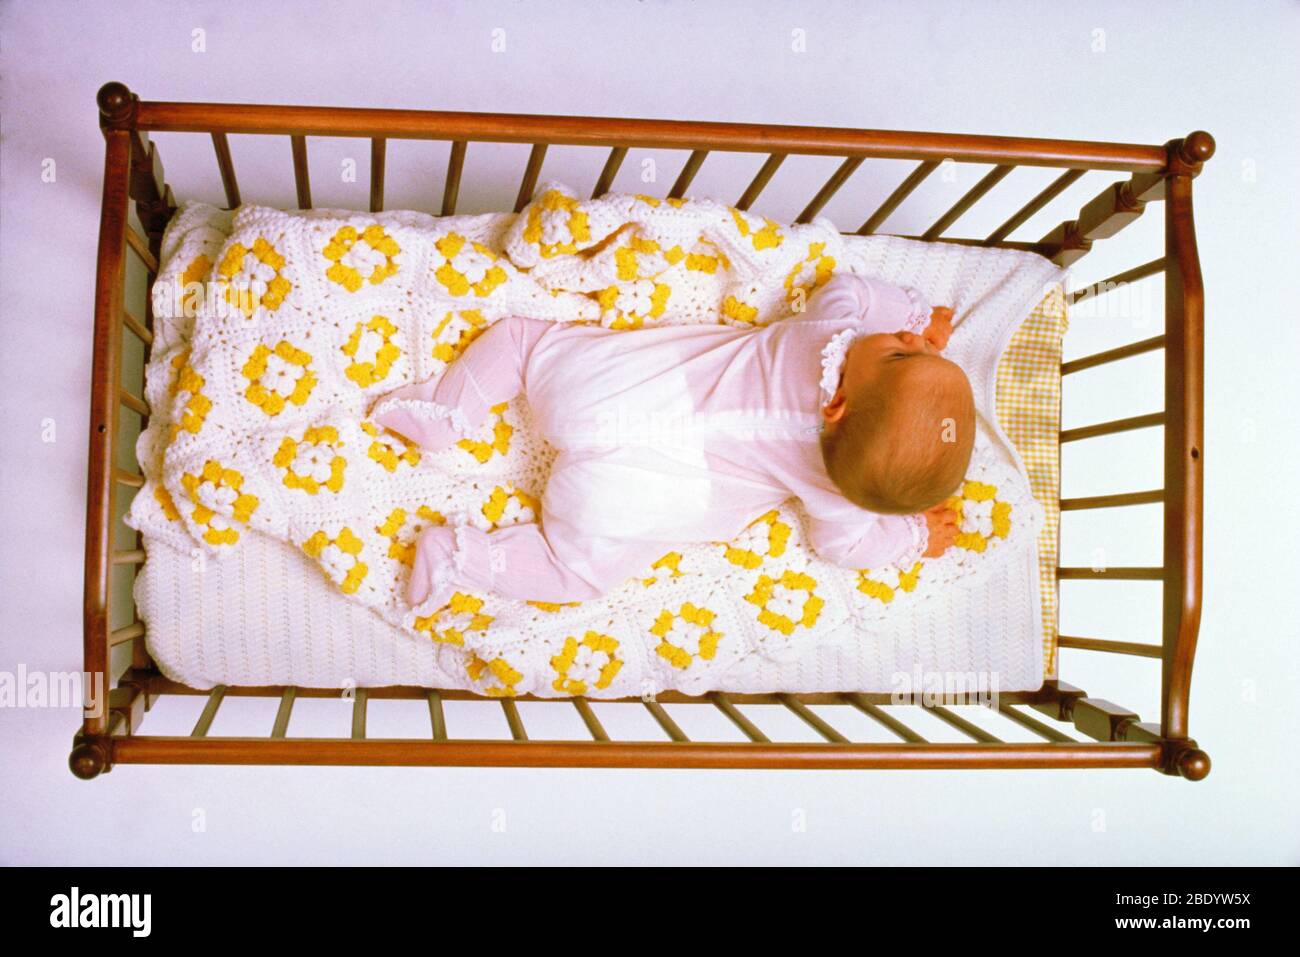 Baby in a crib Stock Photo